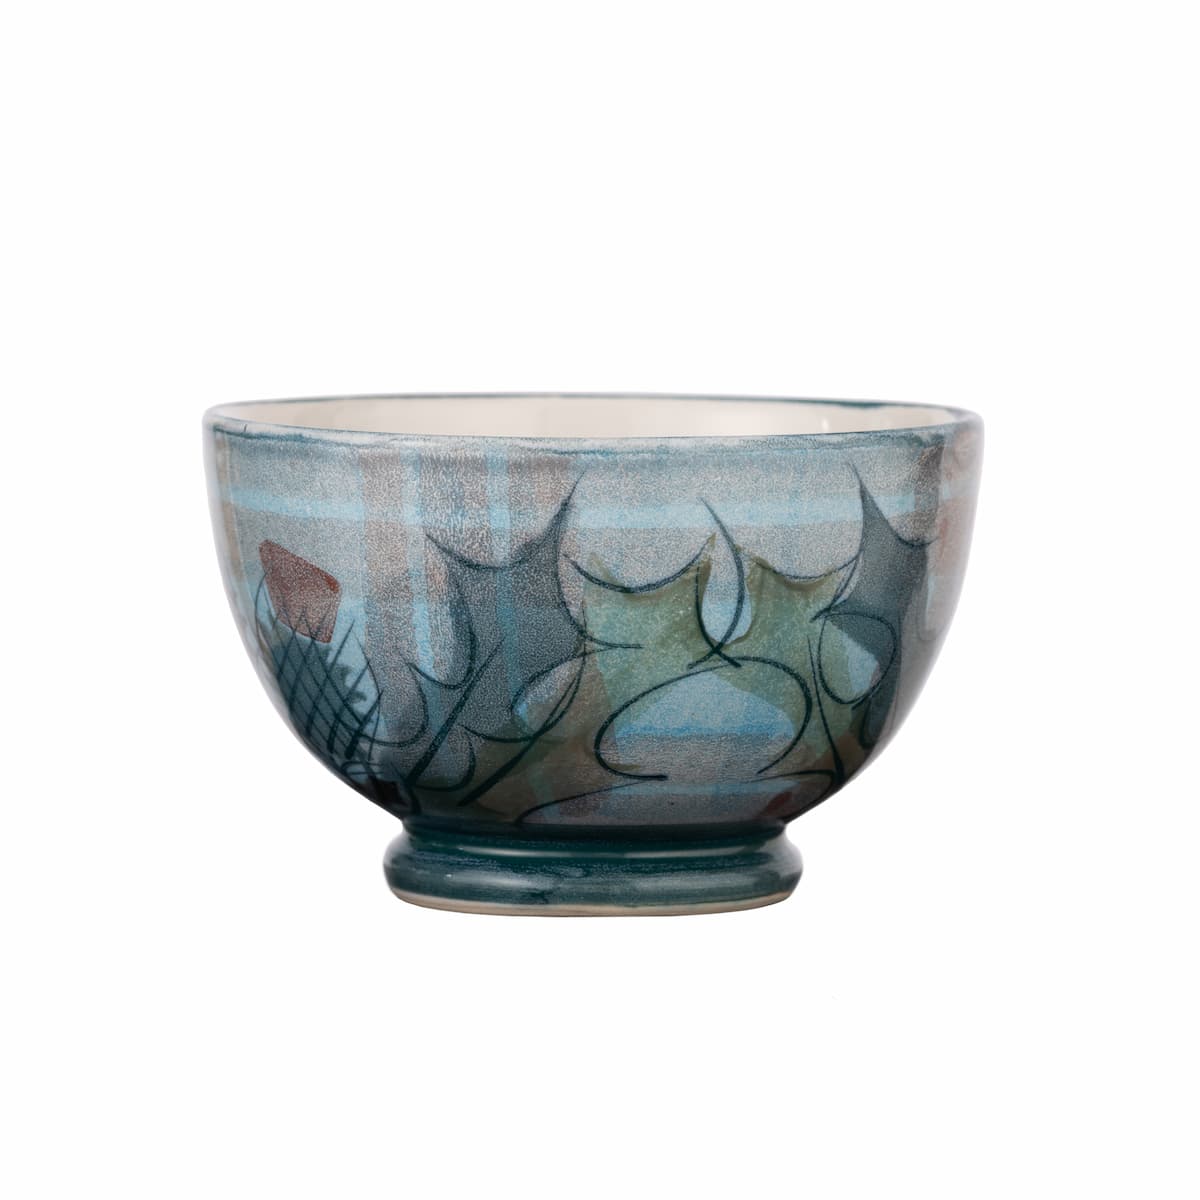 The Tain Pottery Glenaldie Bowl